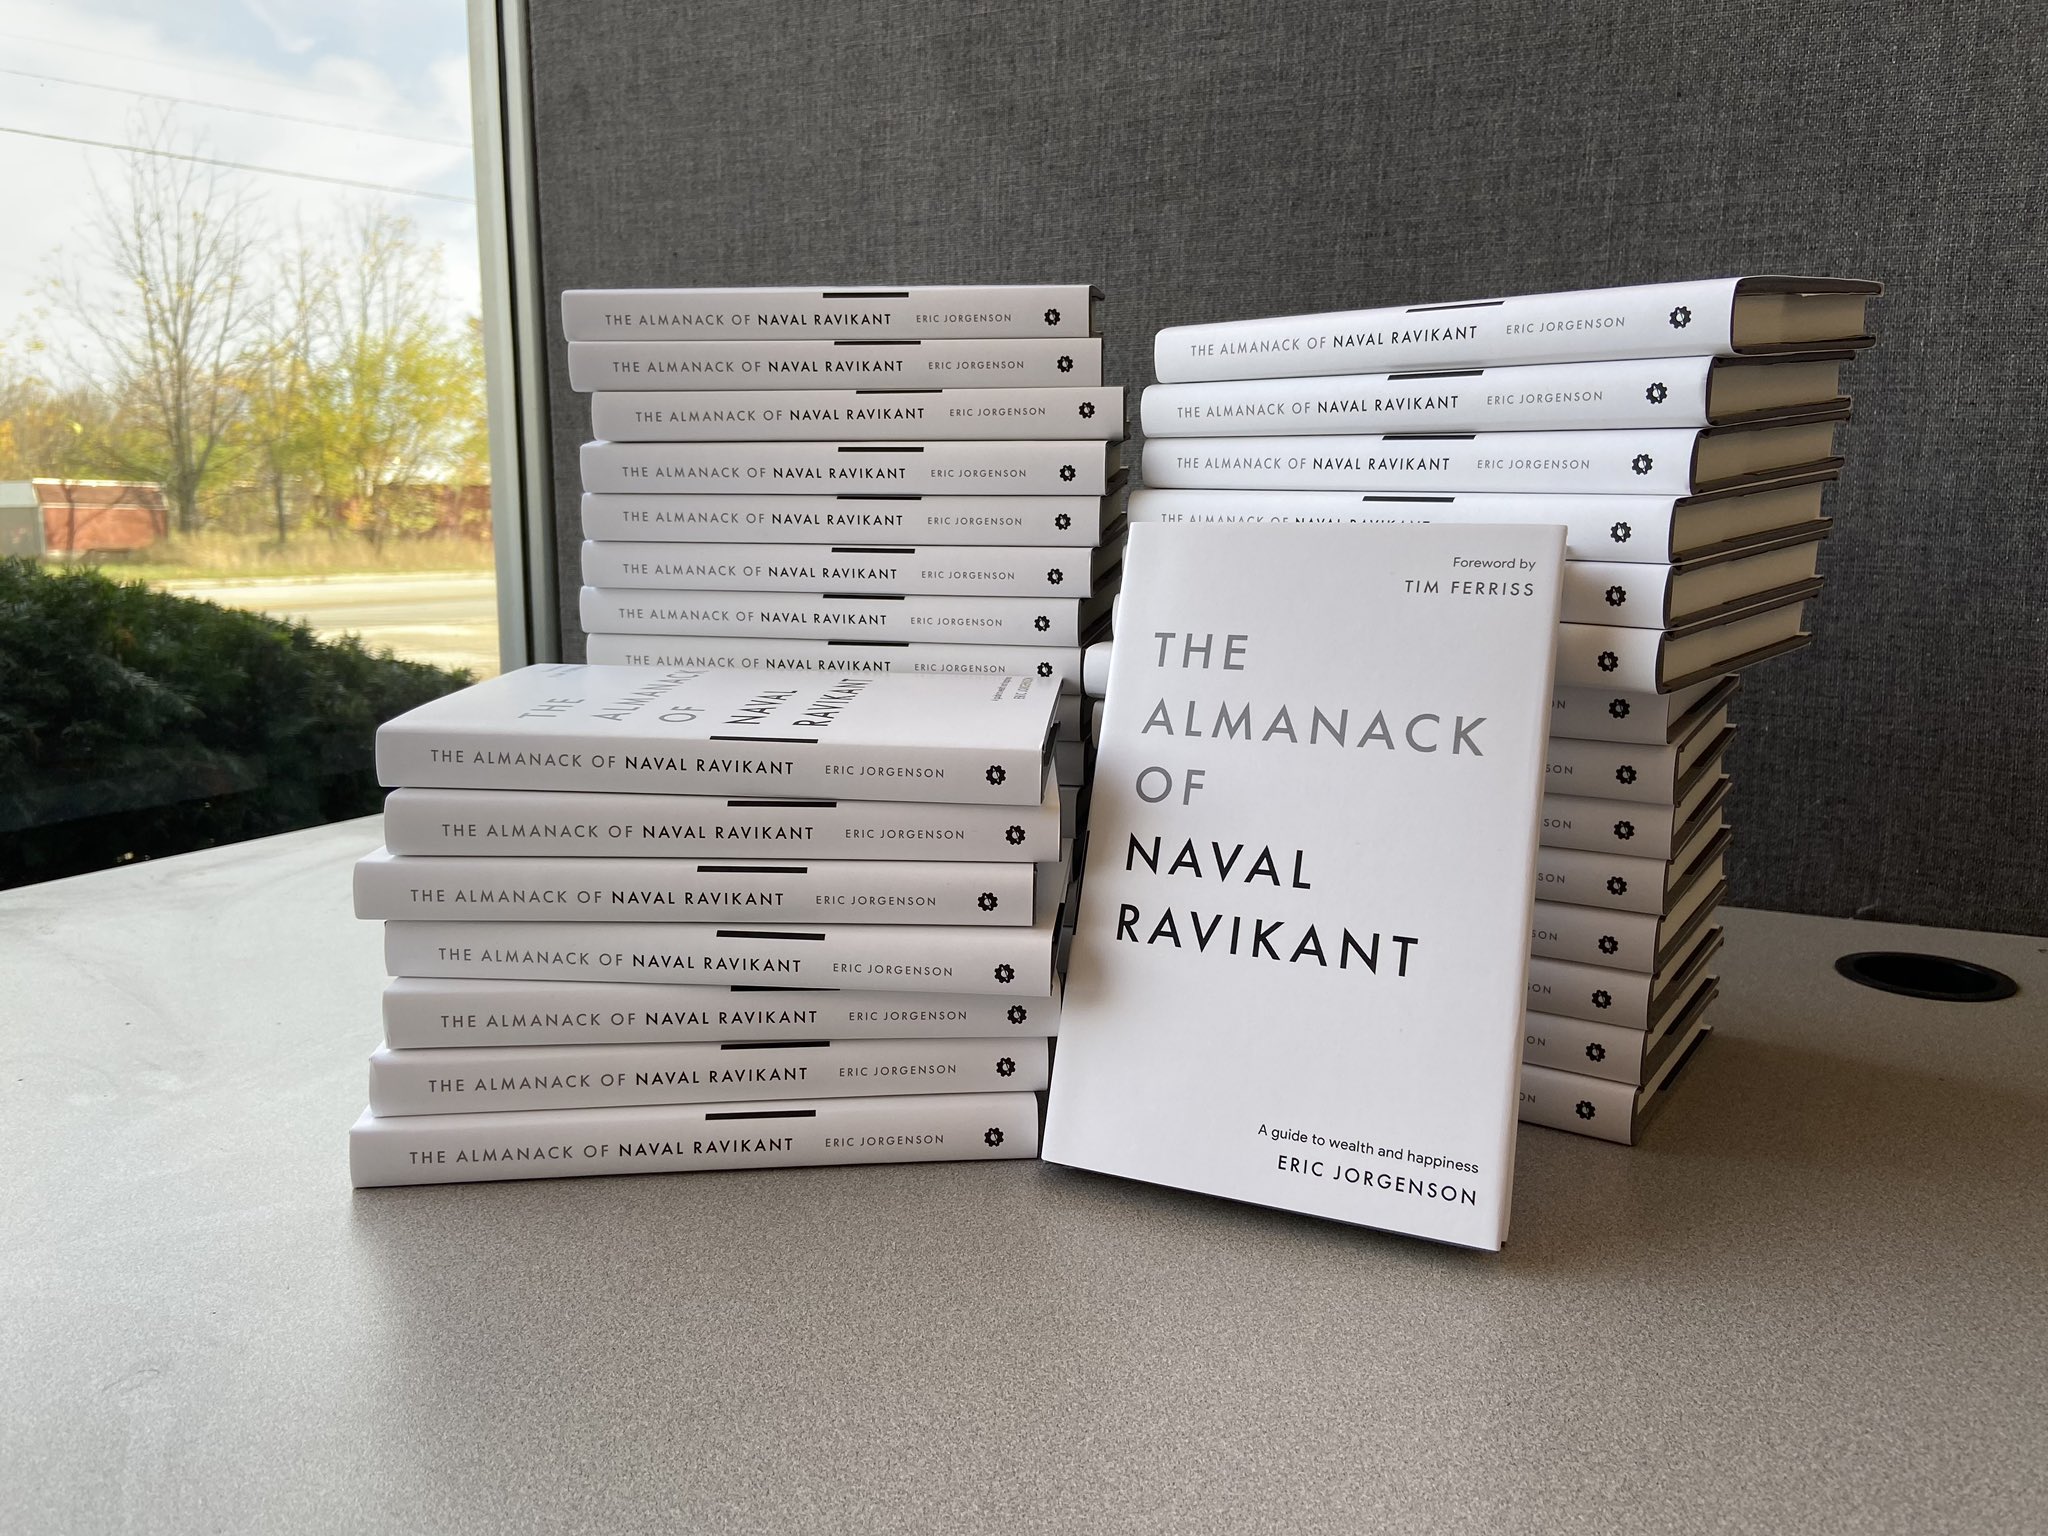 Spikeball🌕Chris on X: All 38 @Spikeball employees will be getting copies  of 'The Almanack of @naval Ravikant' this week. This aligns with our value  of “Listen. Improve. Always be learning.” I started